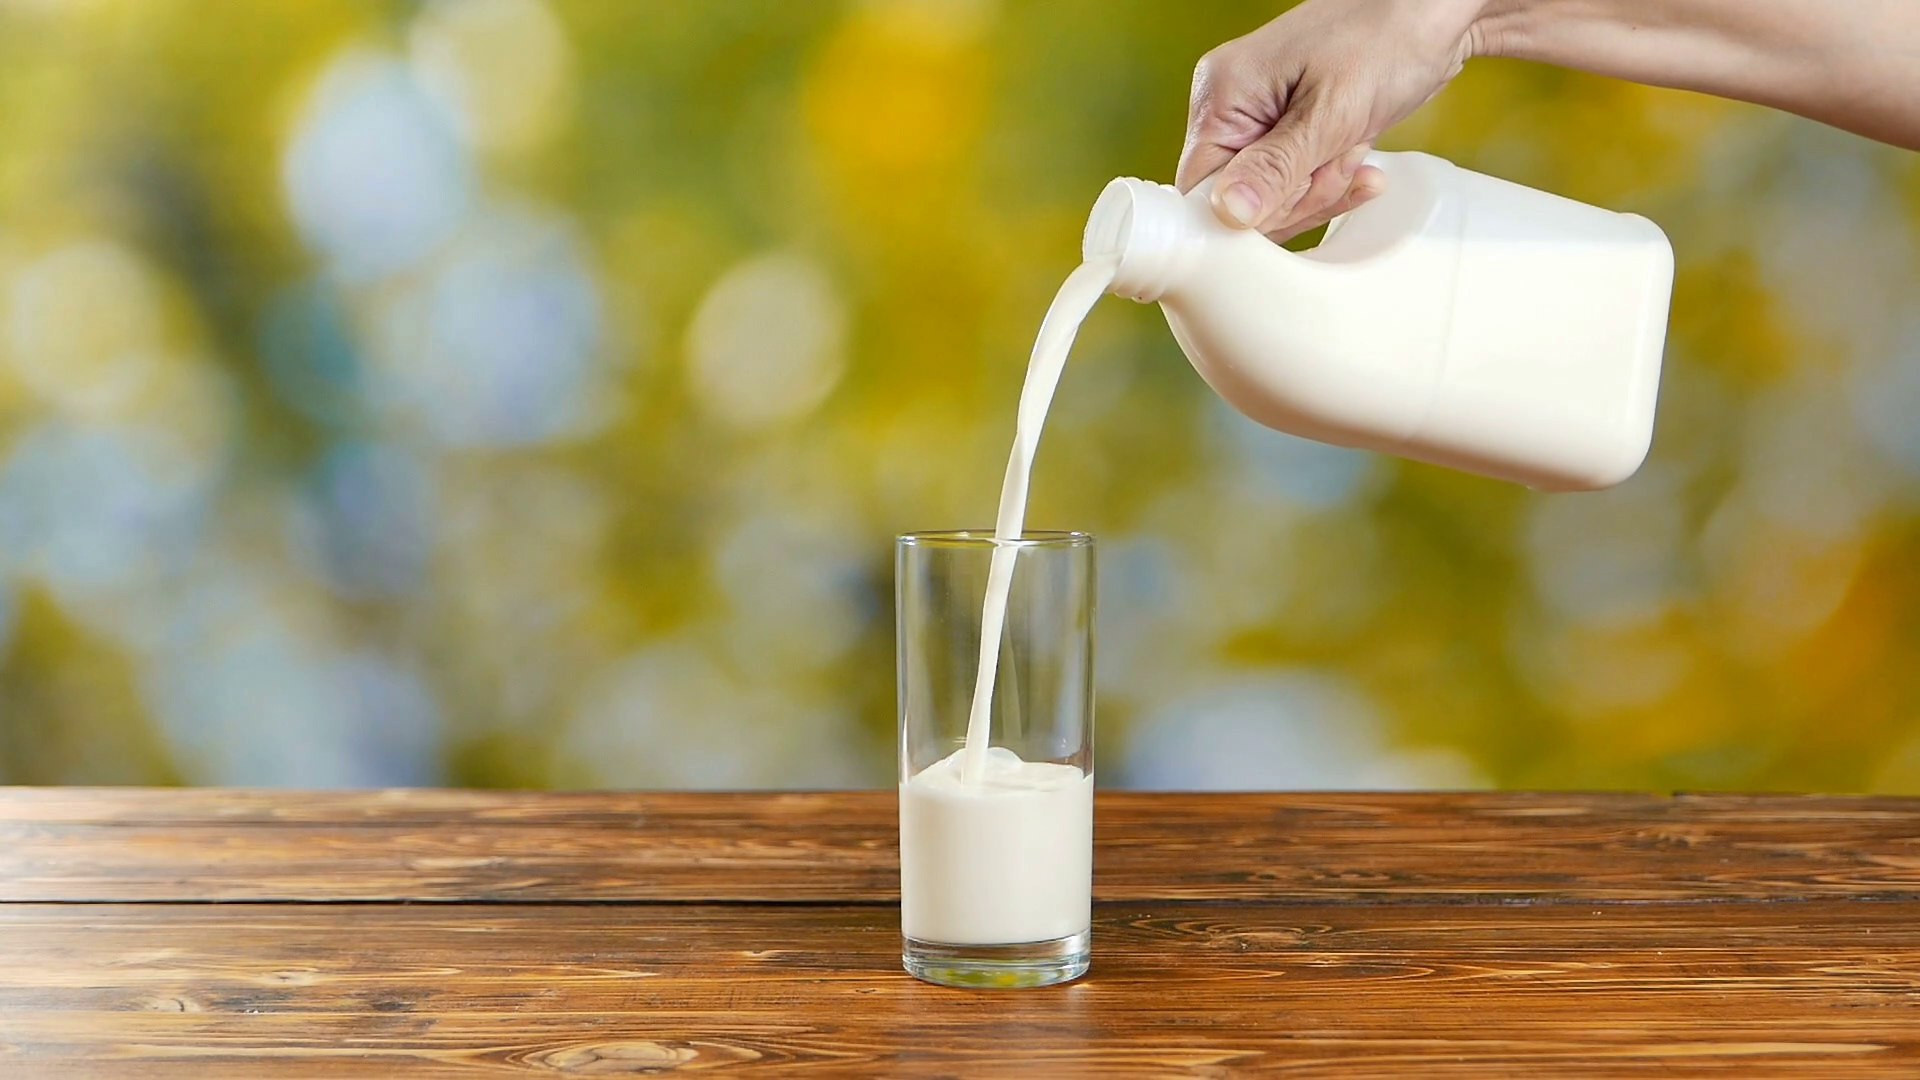 Milk: A post-workout recovery drink due to its protein content. 1920x1080 Full HD Wallpaper.